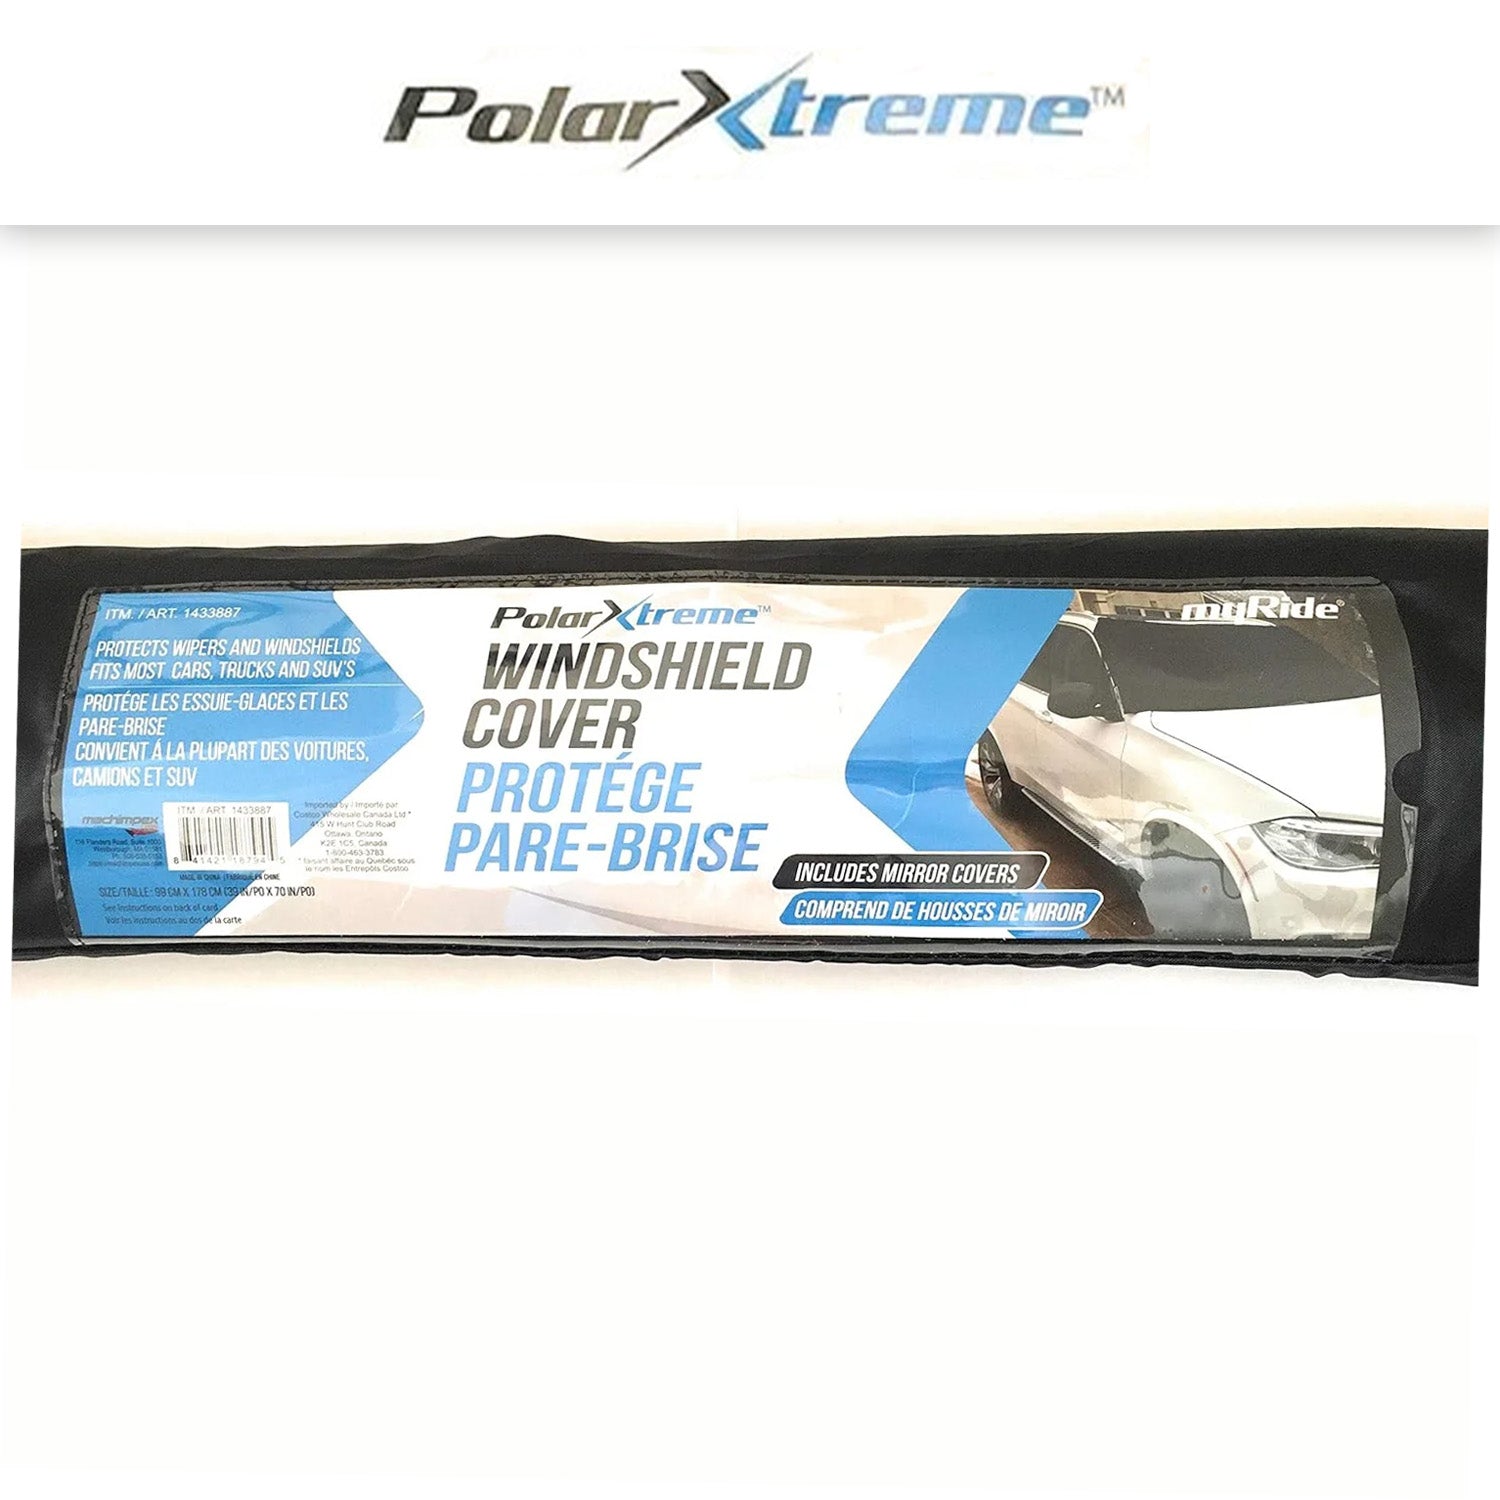 1433887 POLAR EXTREME WINDSHIELD COVER WITH SIDE COVERS 9 97